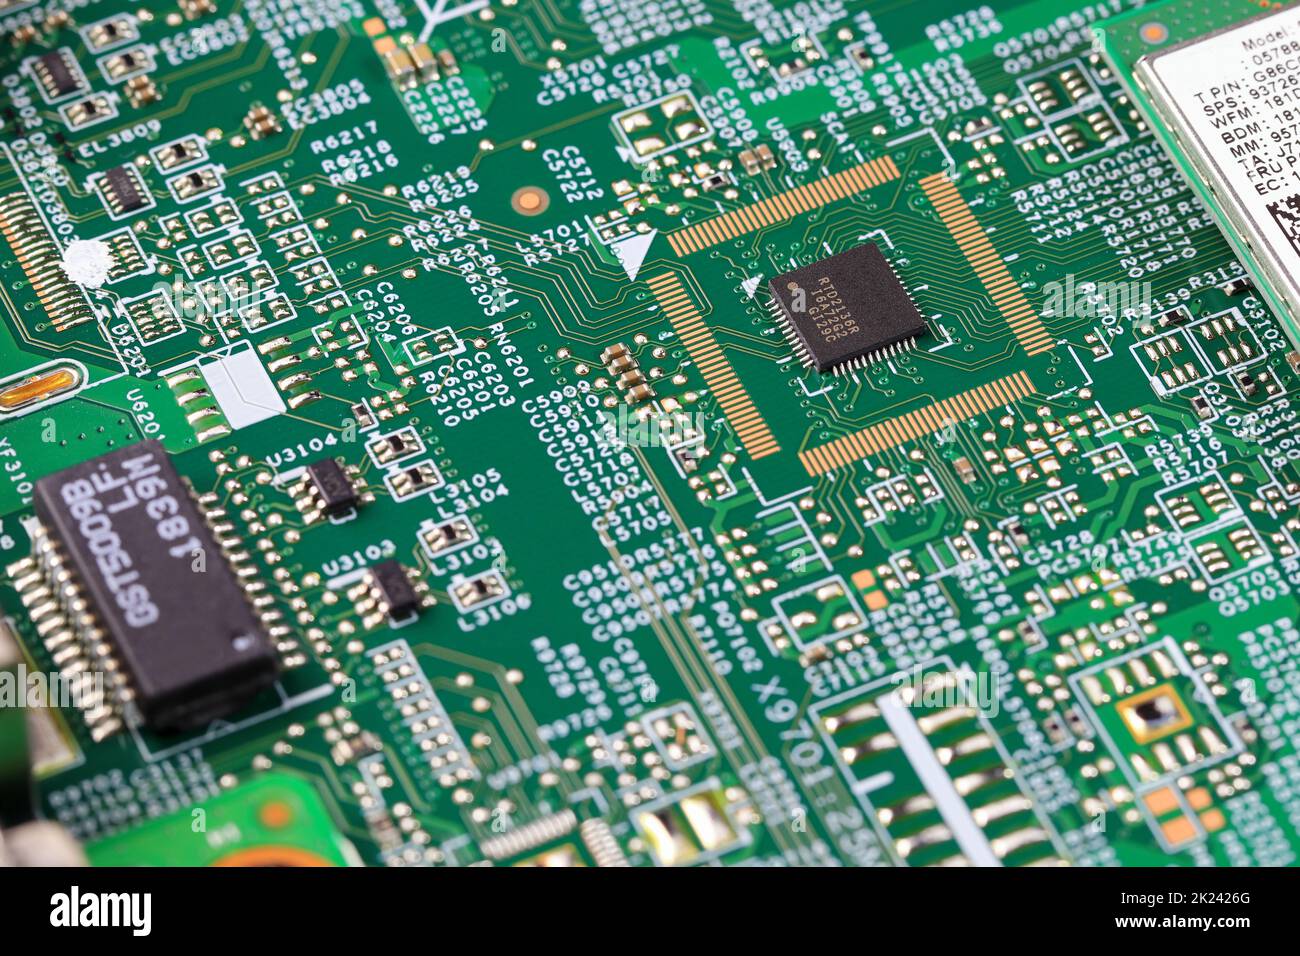 microprocessor on computer circuit board. Photo of electronic component in electronic device. Stock Photo